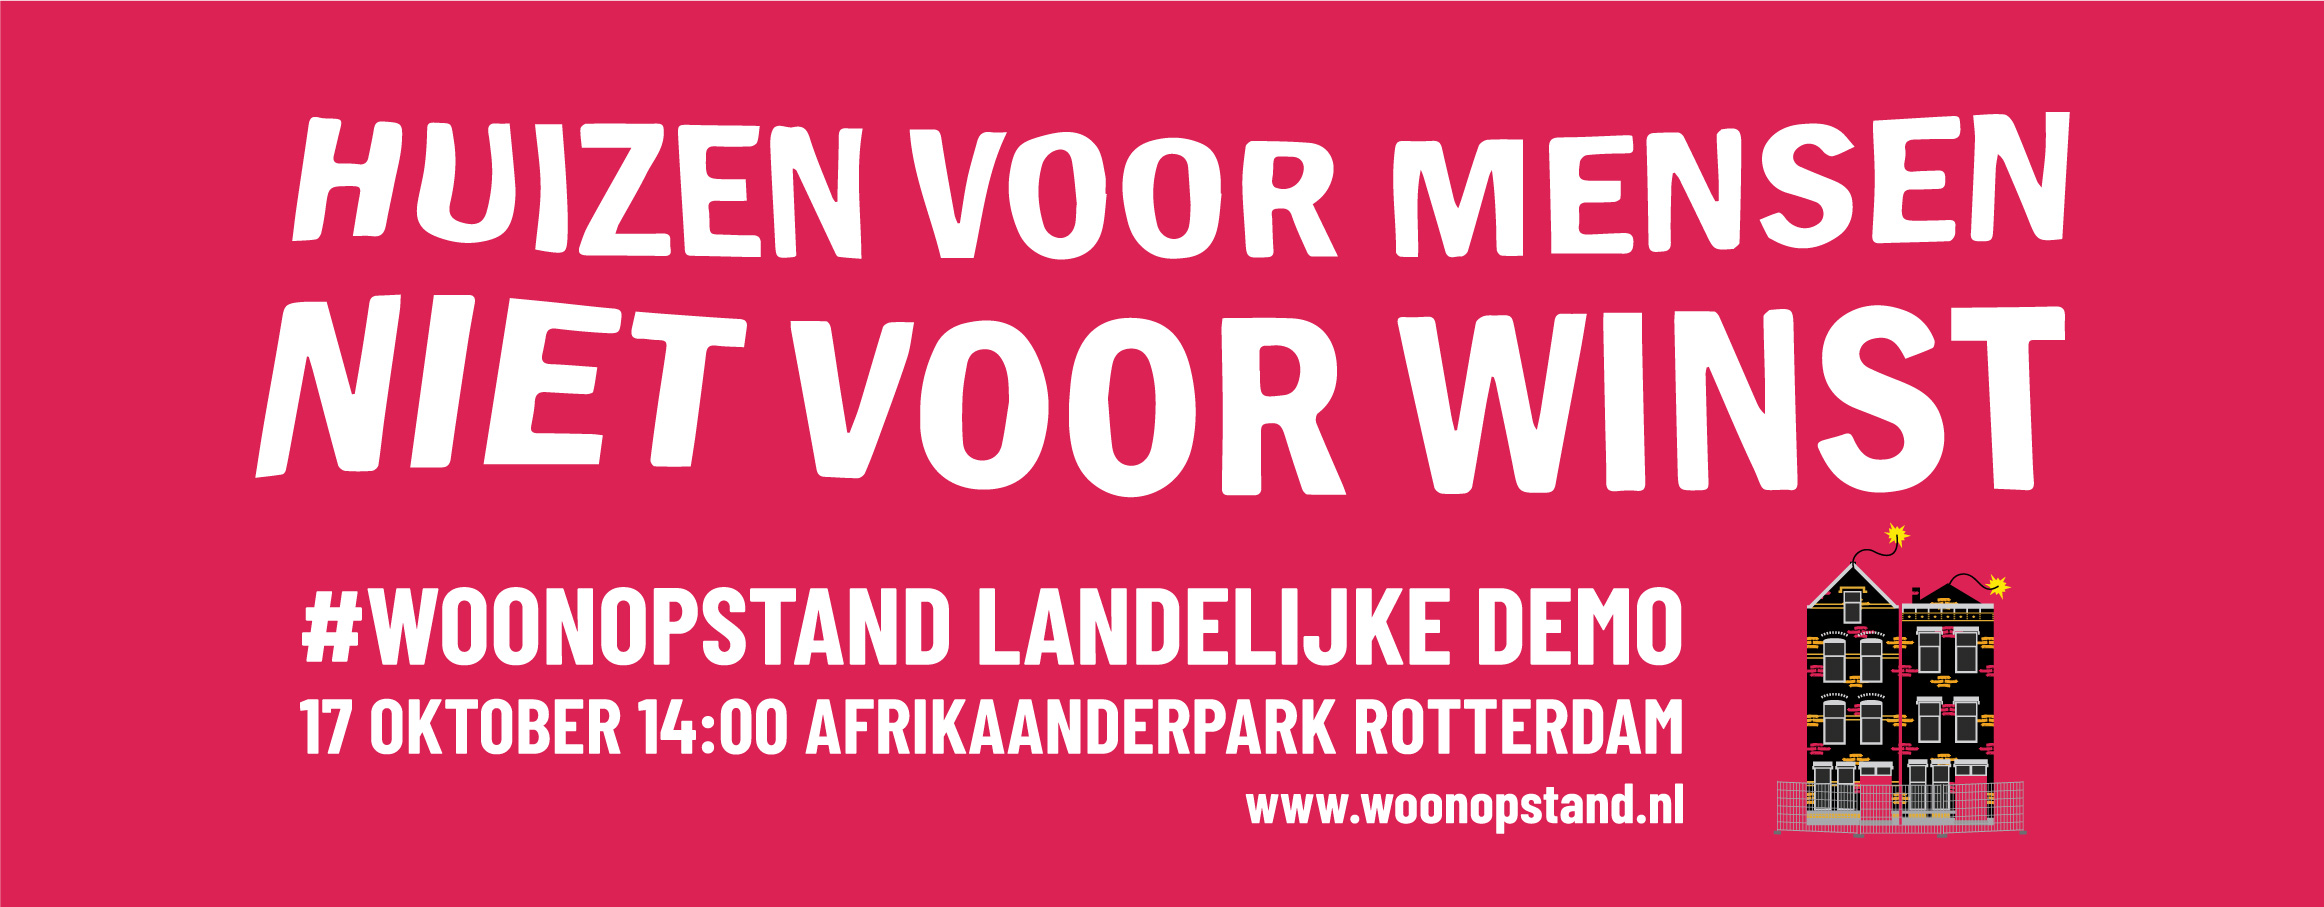 Woonopstand logo